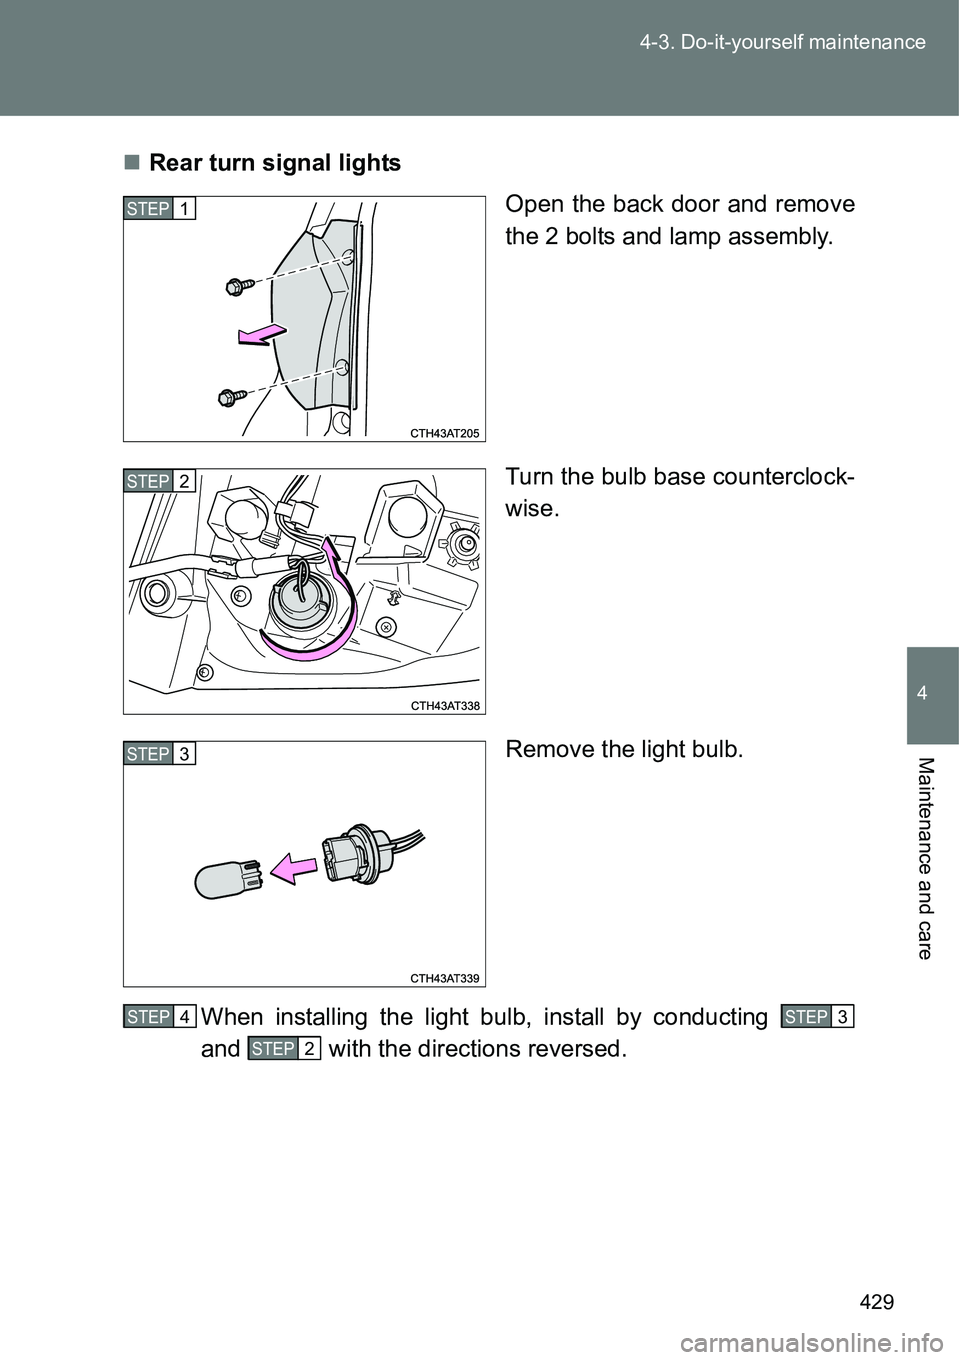 TOYOTA VERSO S 2015  Owners Manual 429 4-3. Do-it-yourself maintenance
4
Maintenance and care
Rear turn signal lights
Open the back door and remove
the 2 bolts and lamp assembly.
Turn the bulb base counterclock-
wise.
Remove the lig